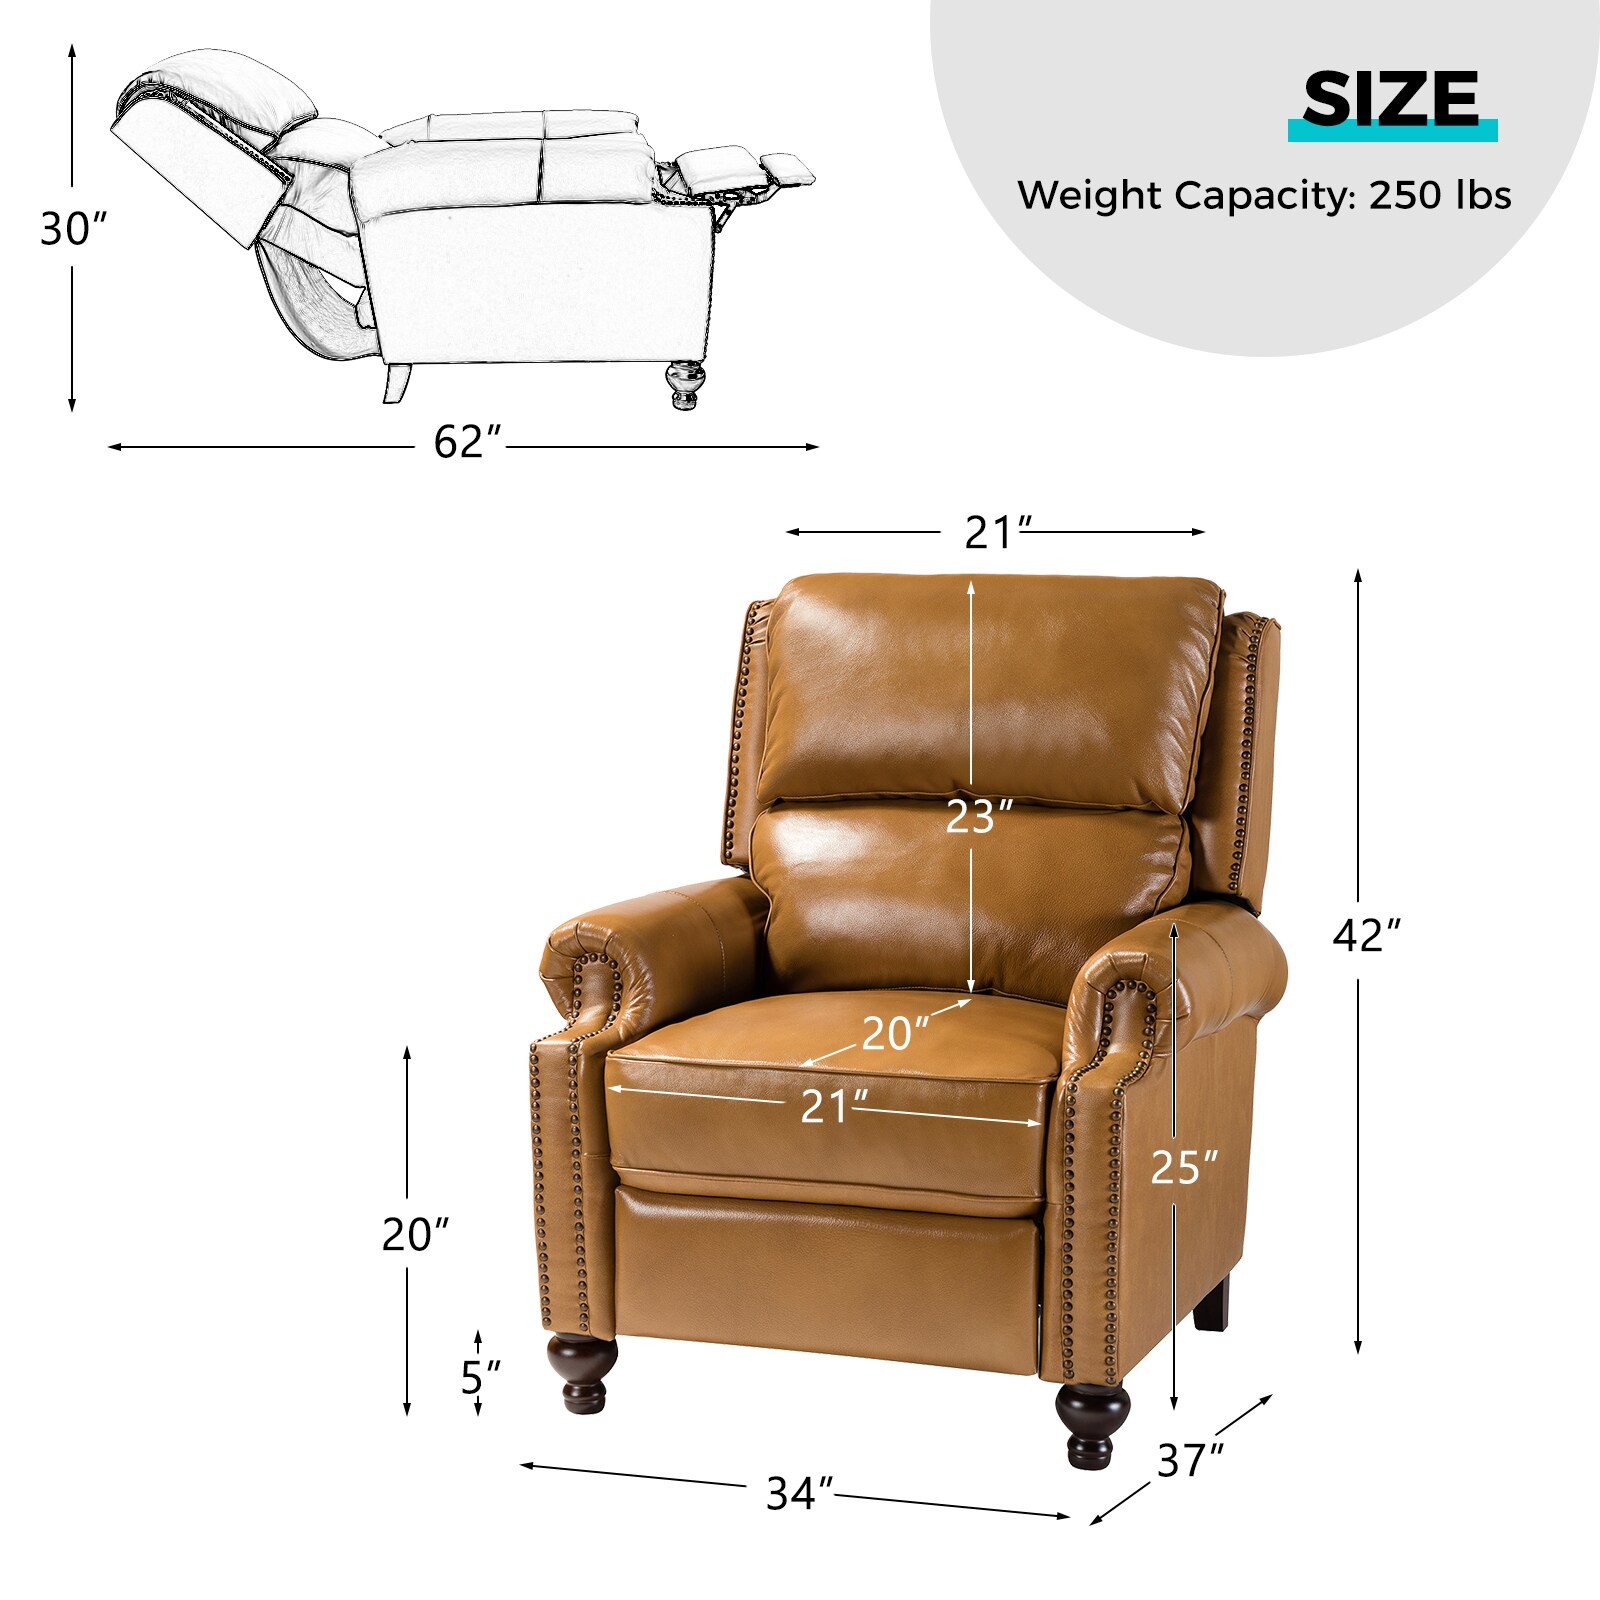 TINA'S HOME Genuine Leather Recliner Chair, Mid-Century Modern Push Back  Recliner Chair with Wood Feet & Armrest, Headrest & Lumbar Support, Manual